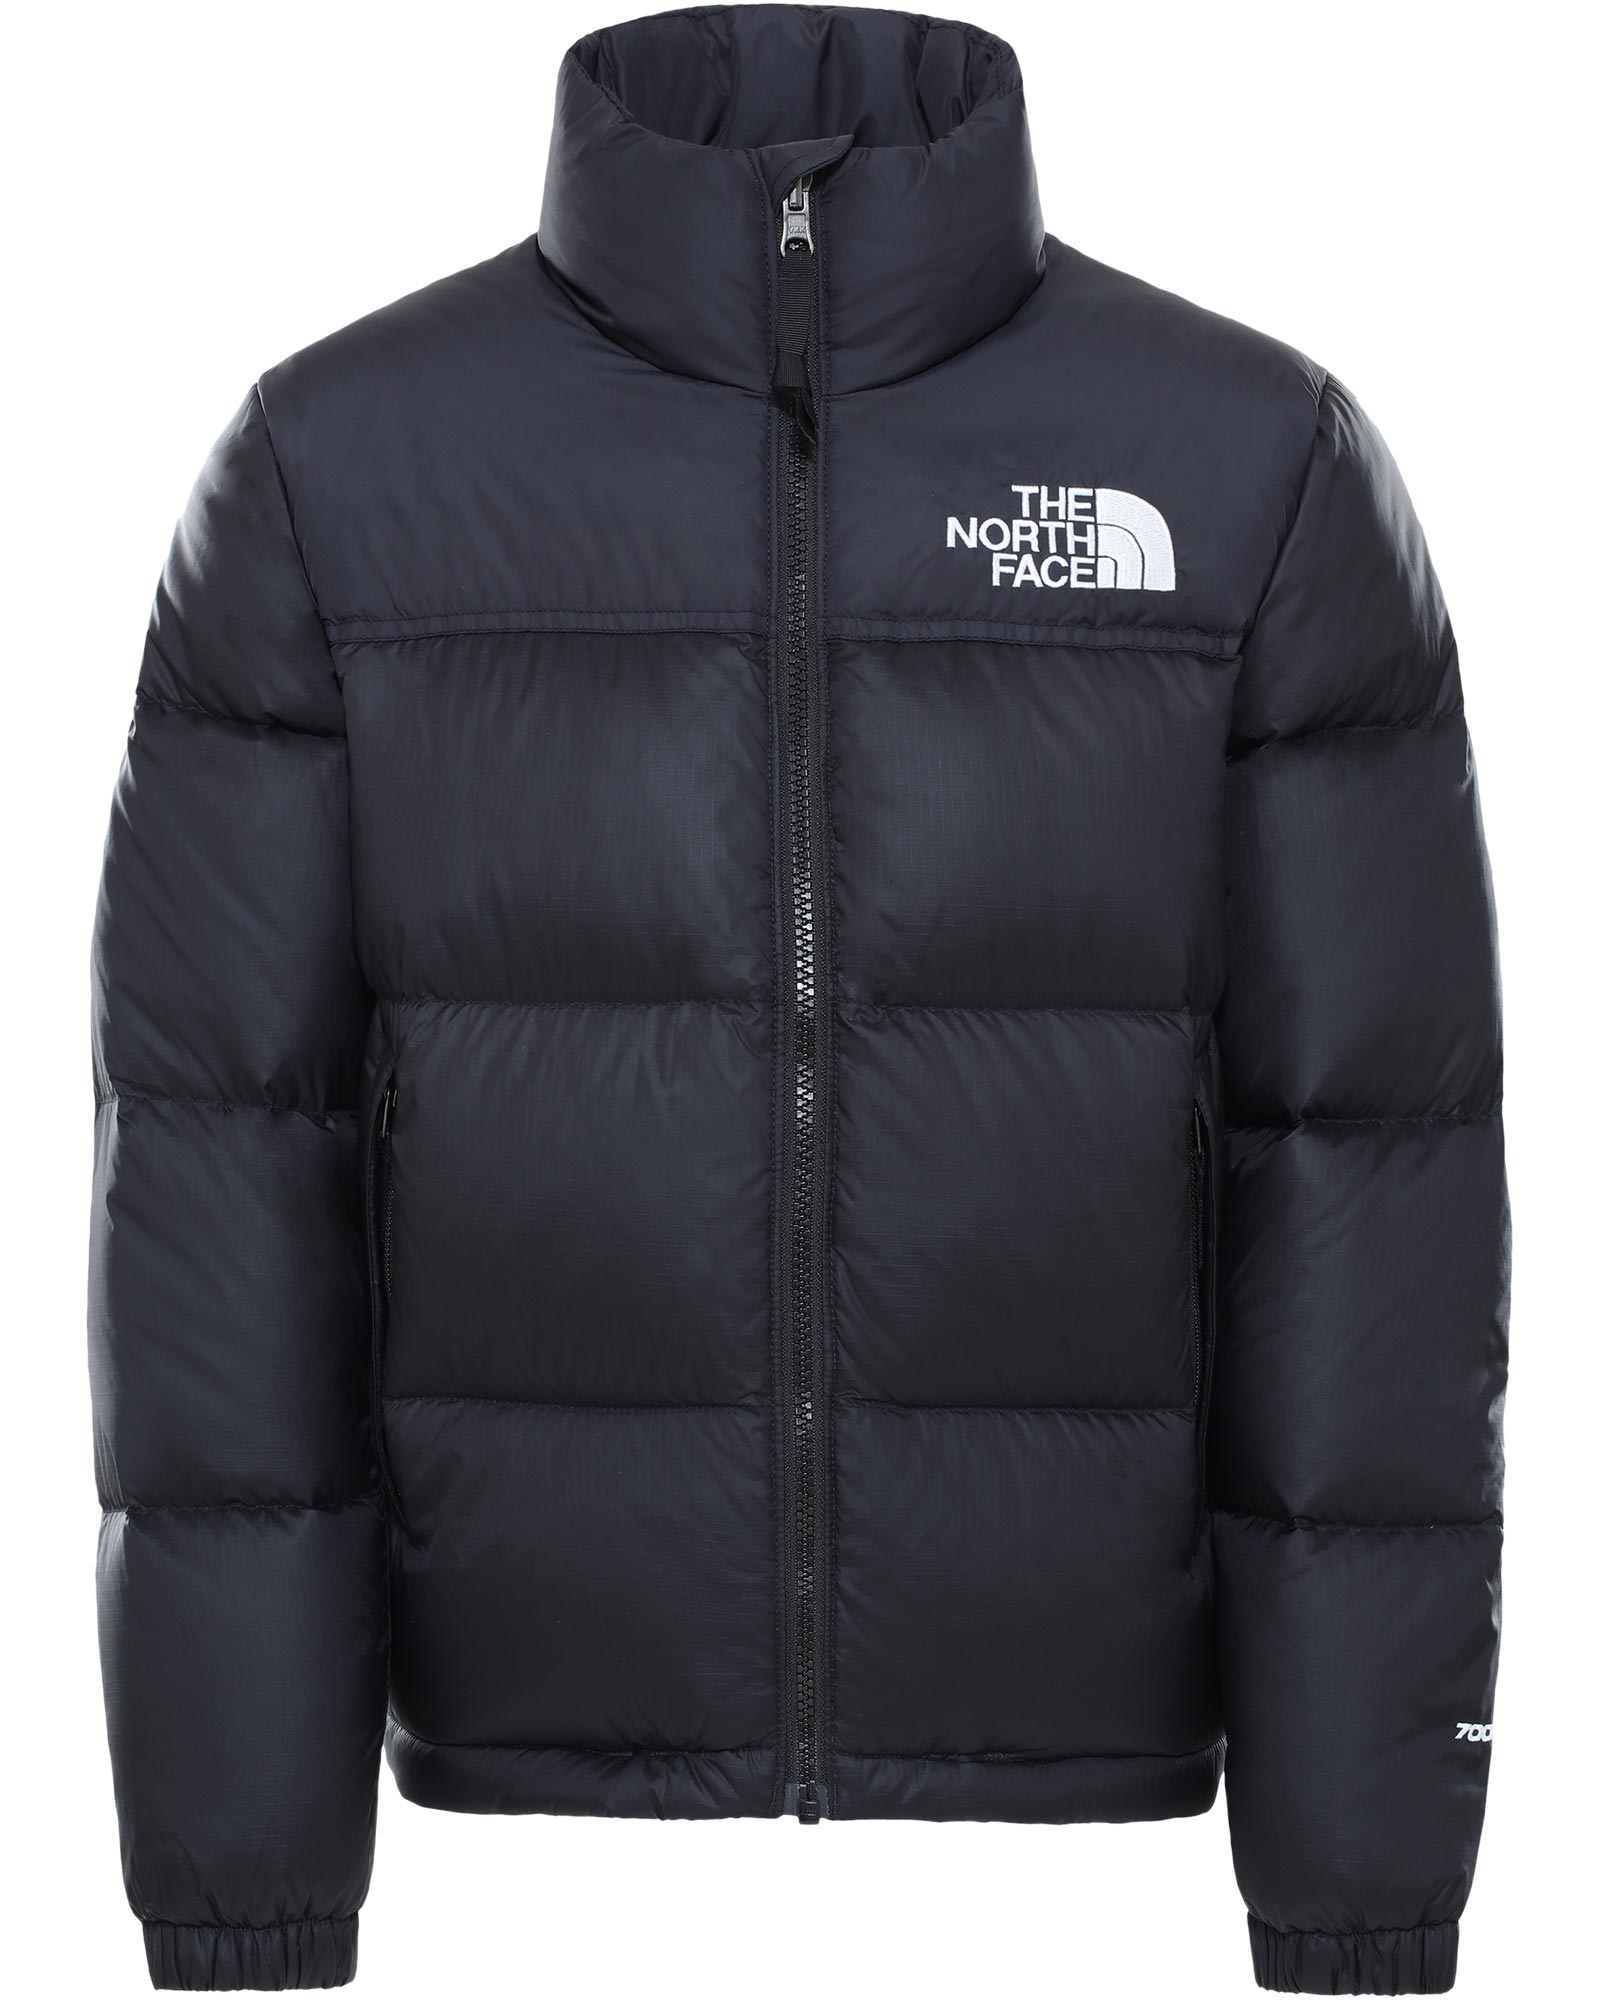 north face puffer jacket all black 